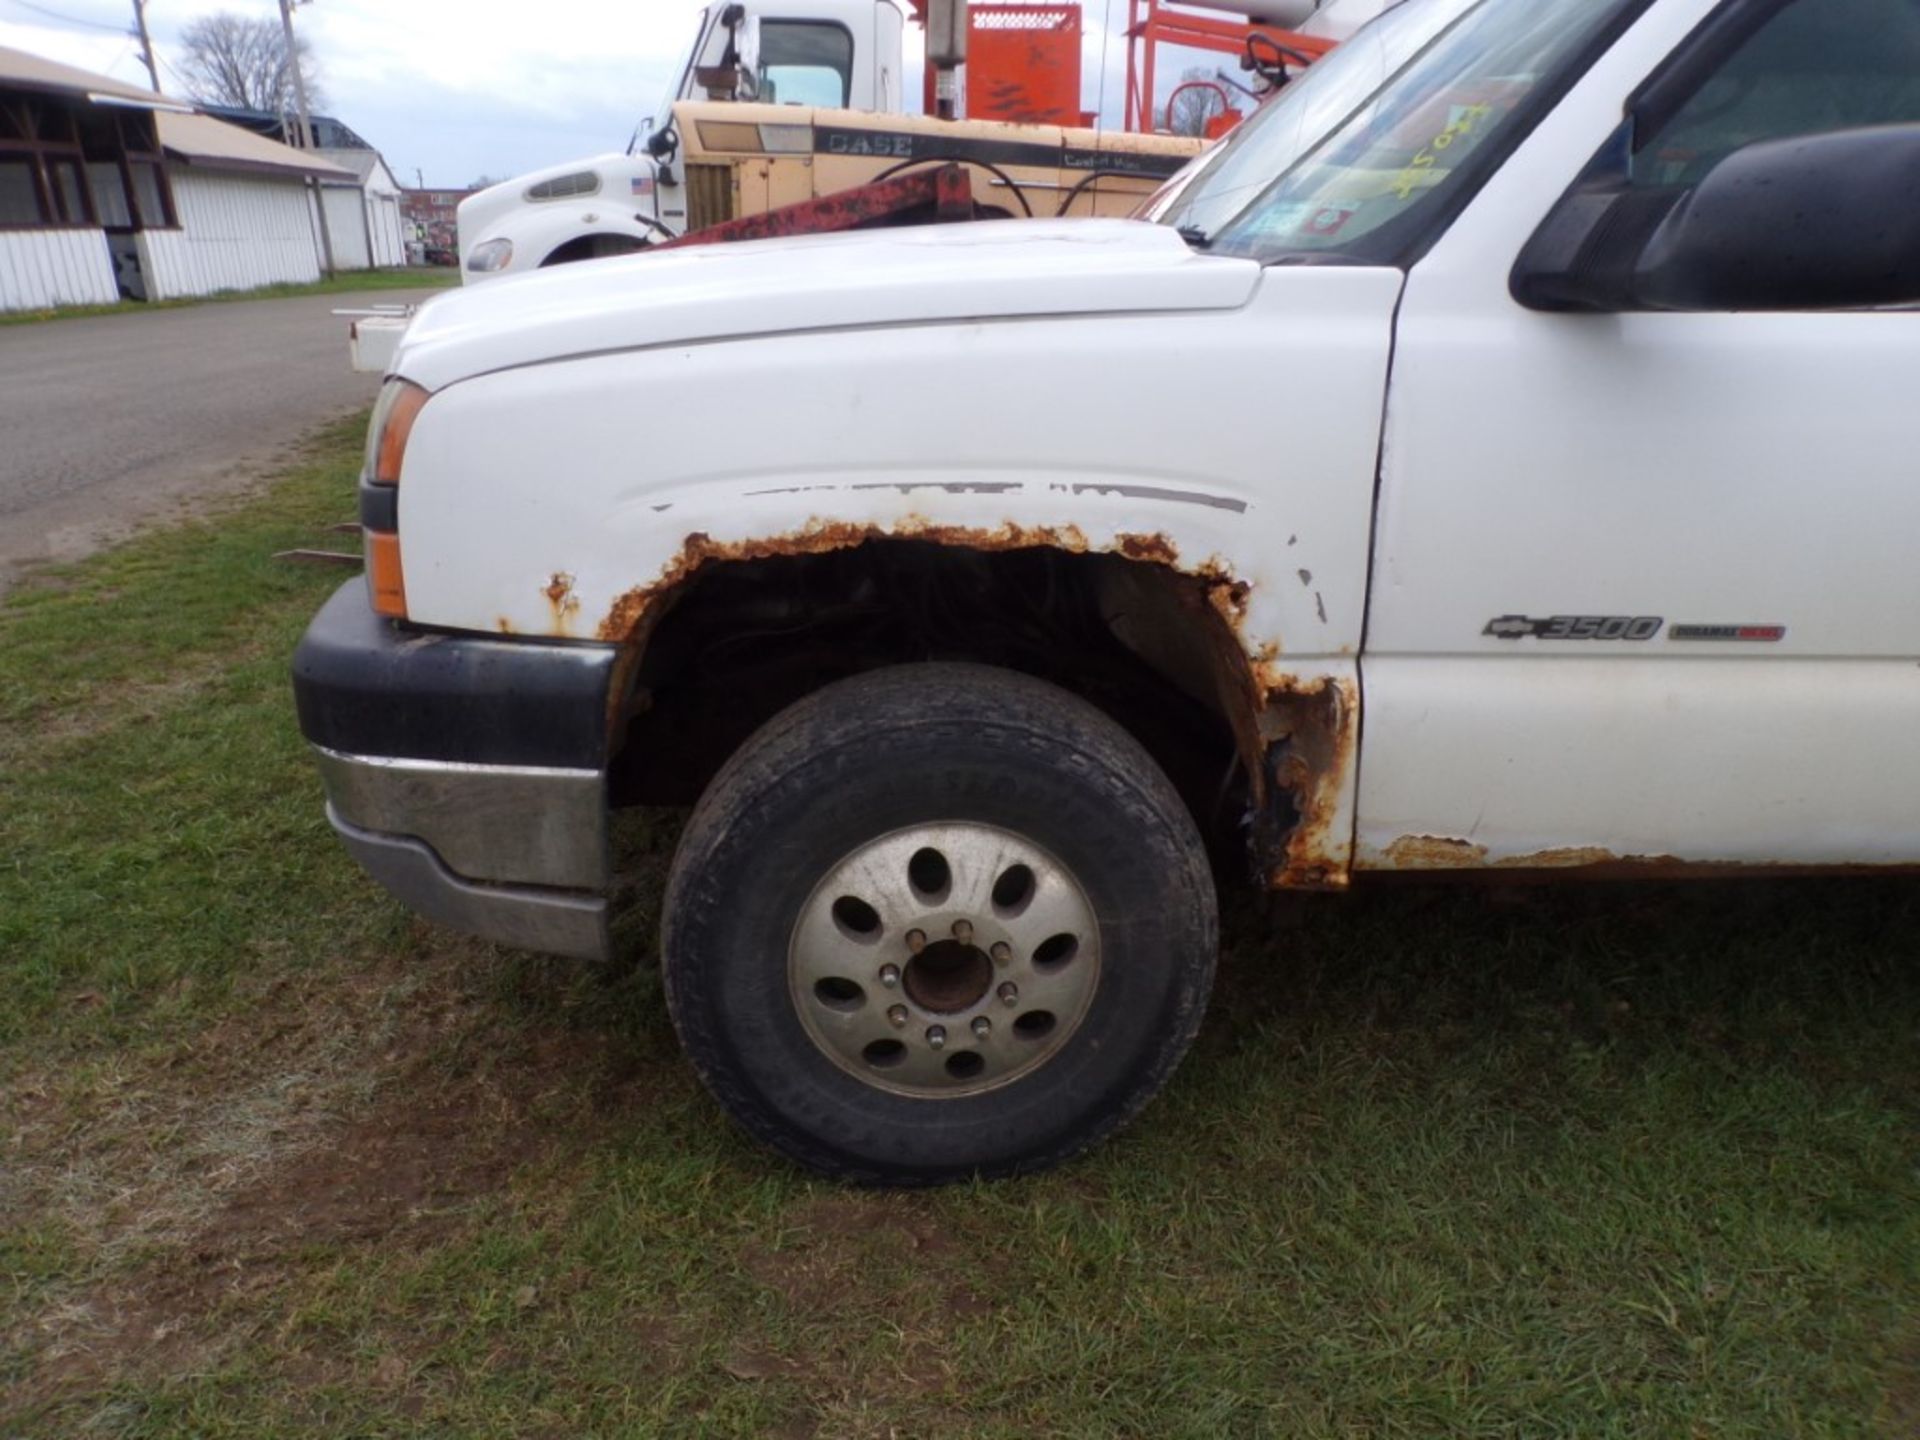 2005 Chevrolet 3500 Dually, 4WD, Duramax Dsl Eng, Vin# 1GCJK332X5F970276 - HAVE TITLE (463) - Image 2 of 7